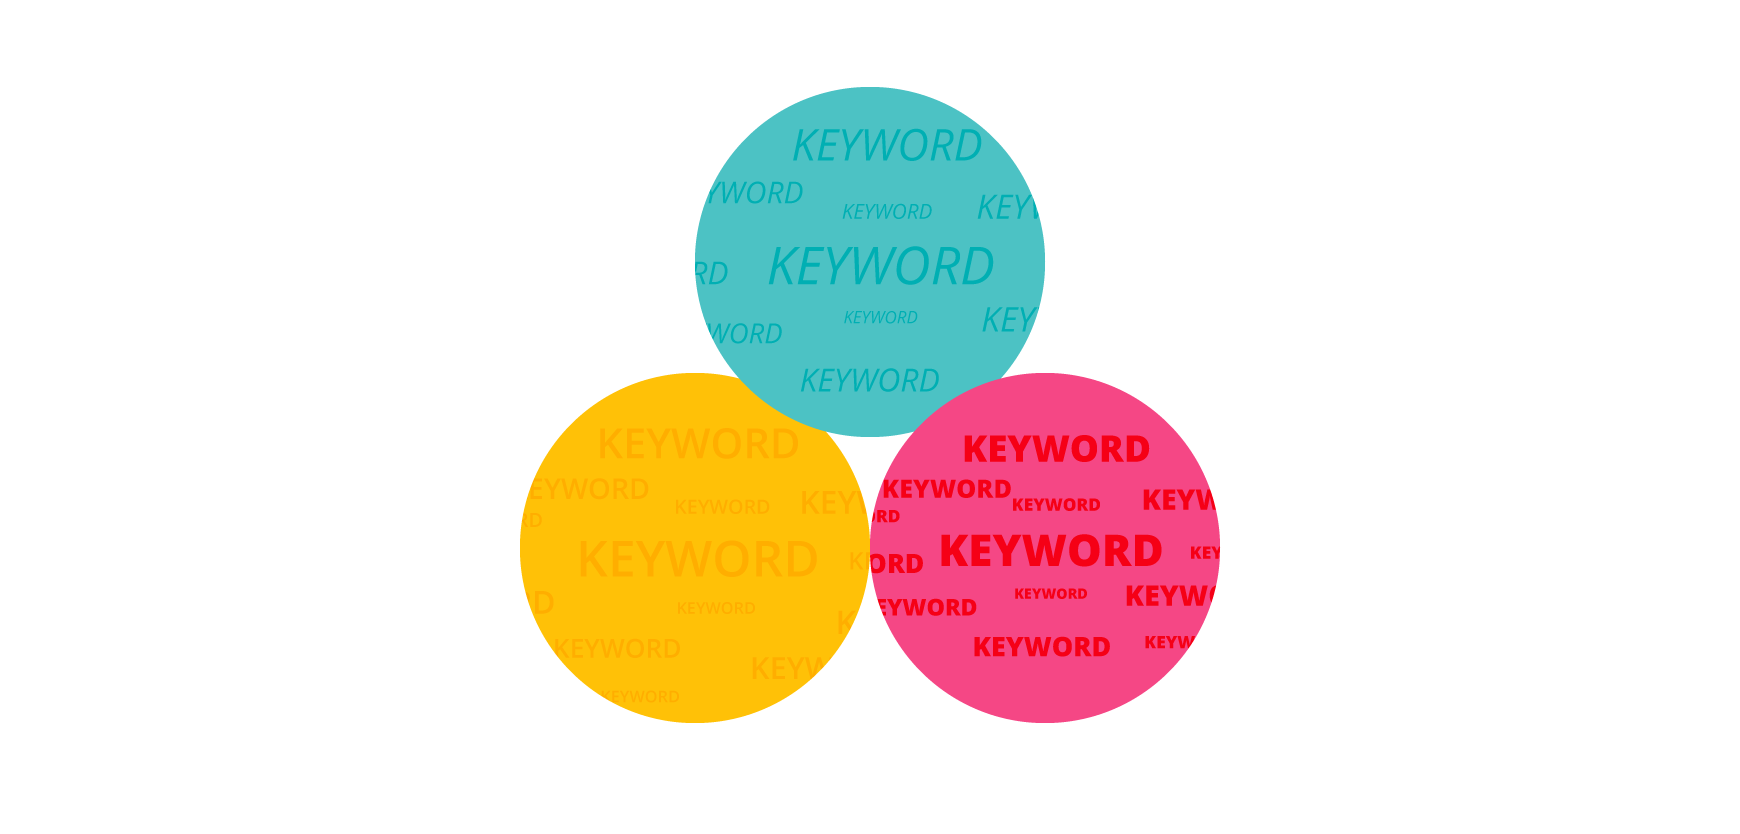 How to Group Keywords for SEO - FOUND